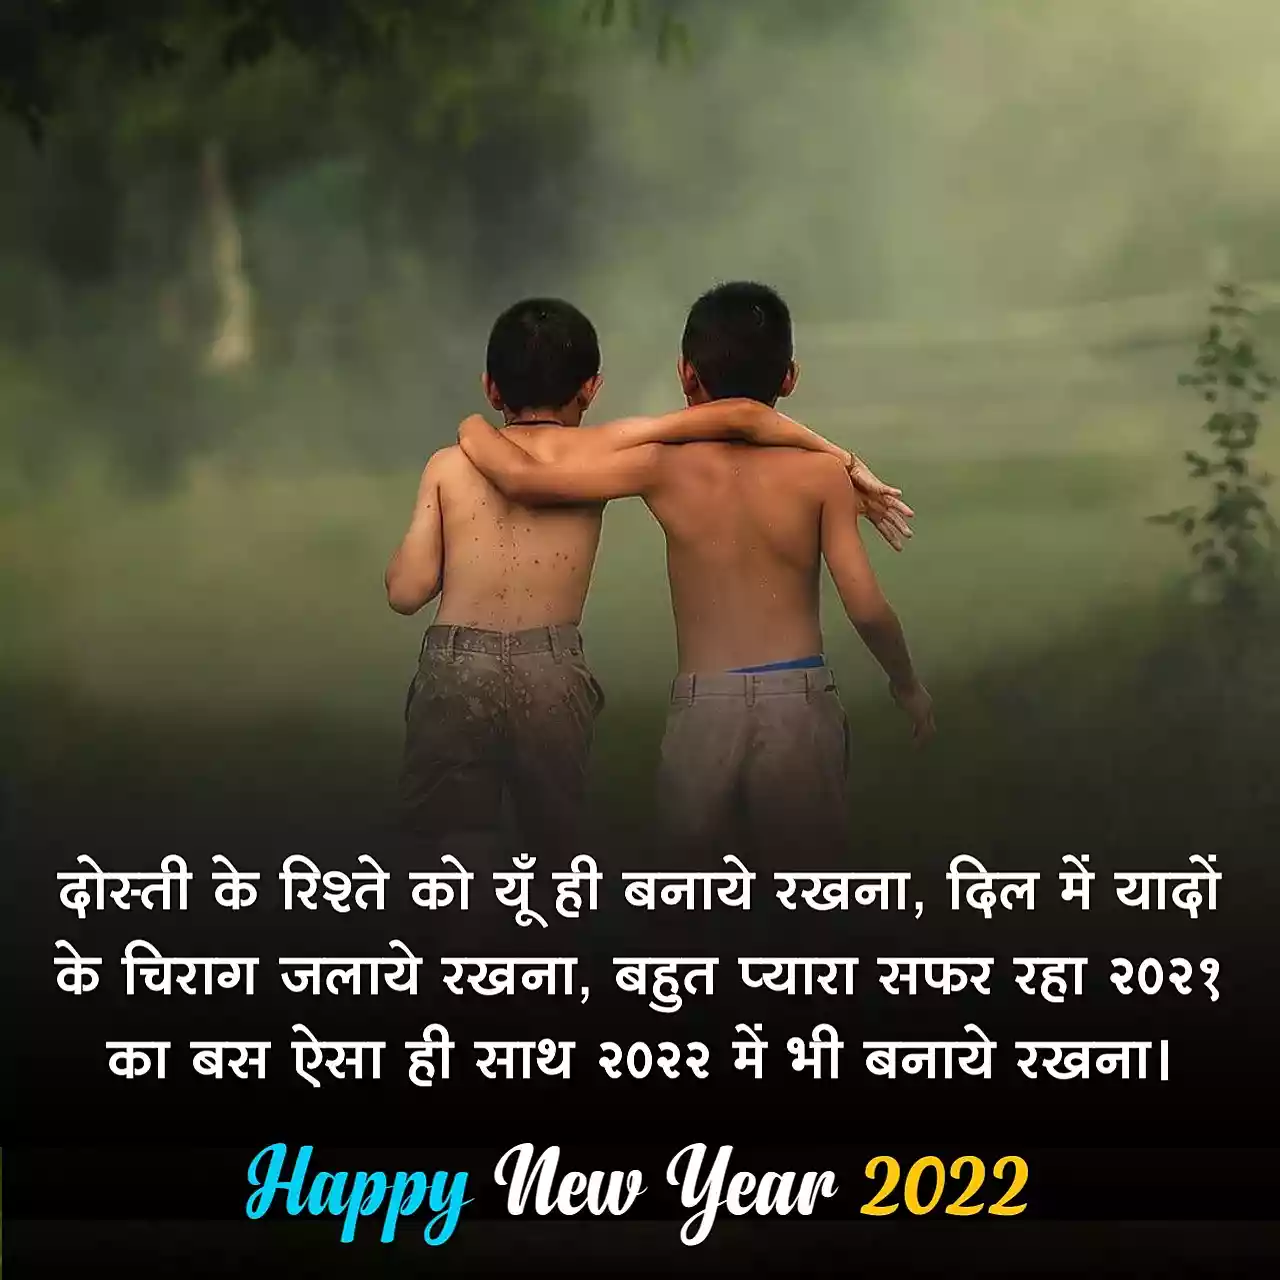 Happy new year status for friends in hindi